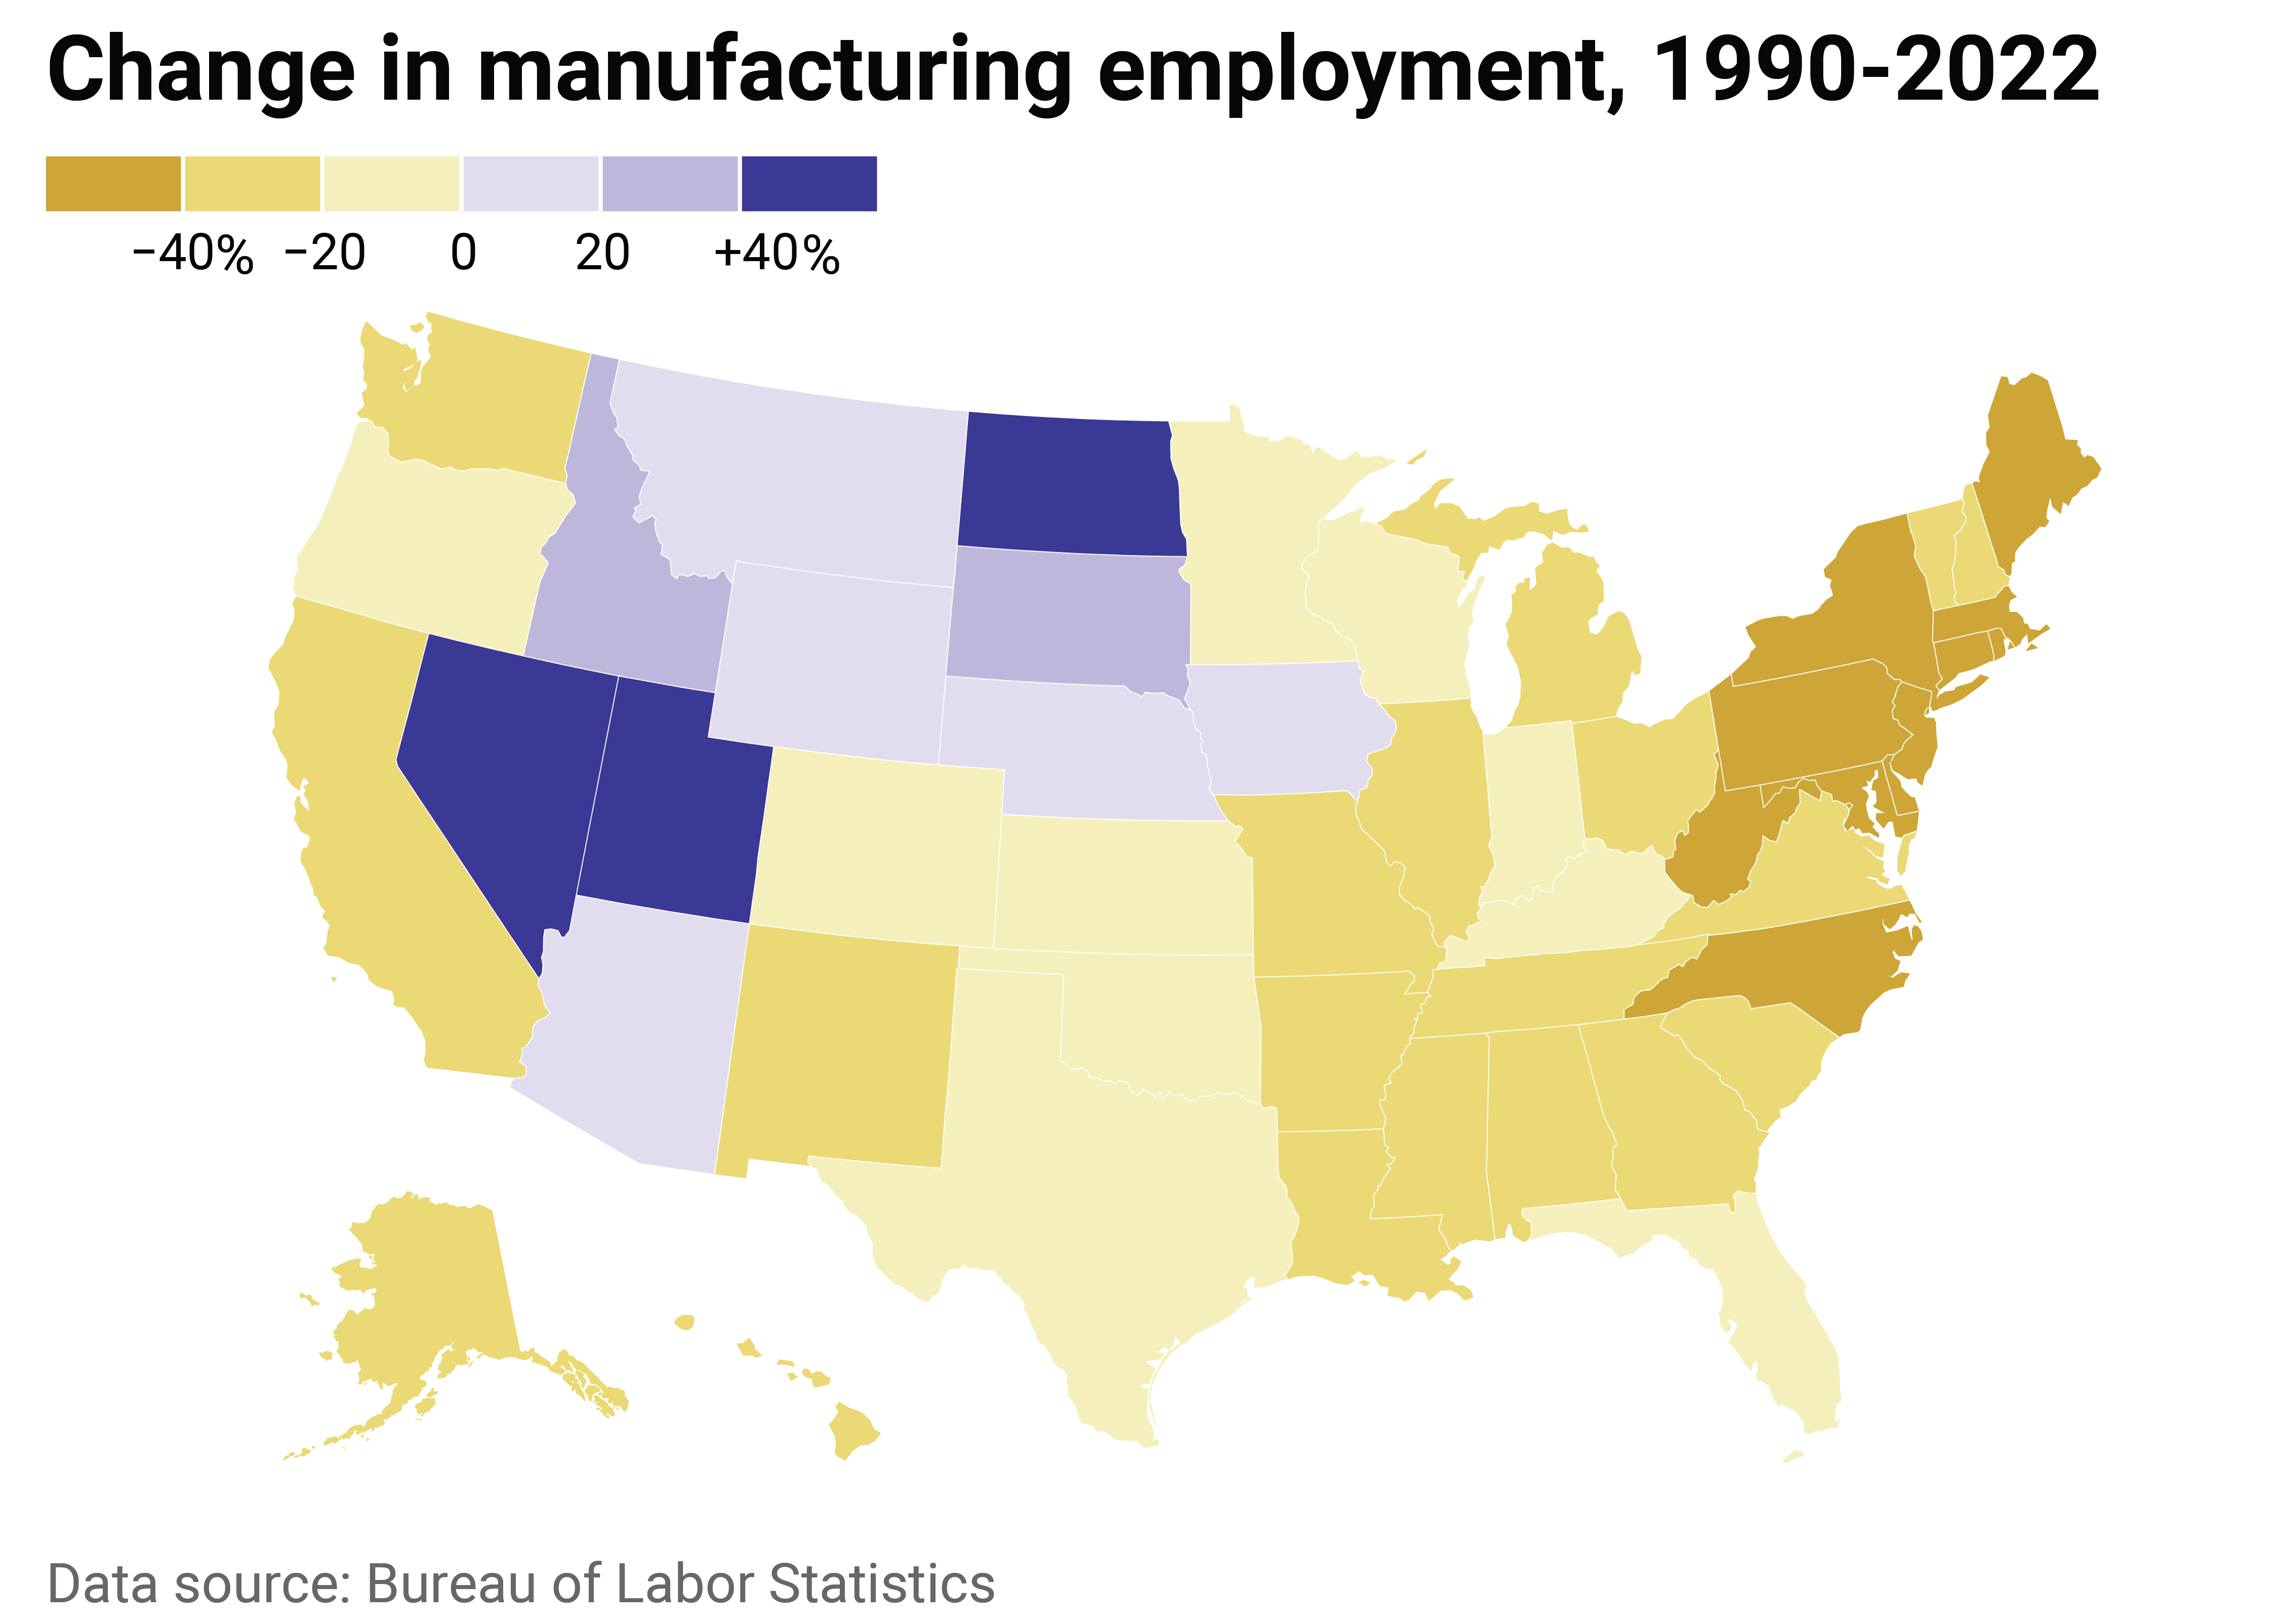 Heat map showing the state-by-state change in manufacturing employment from June 1990 to June 2022, with the highest increases being in the Midwest and Mountain regions and the largest decreases being in the Northeast and Mid-atlantic regions.